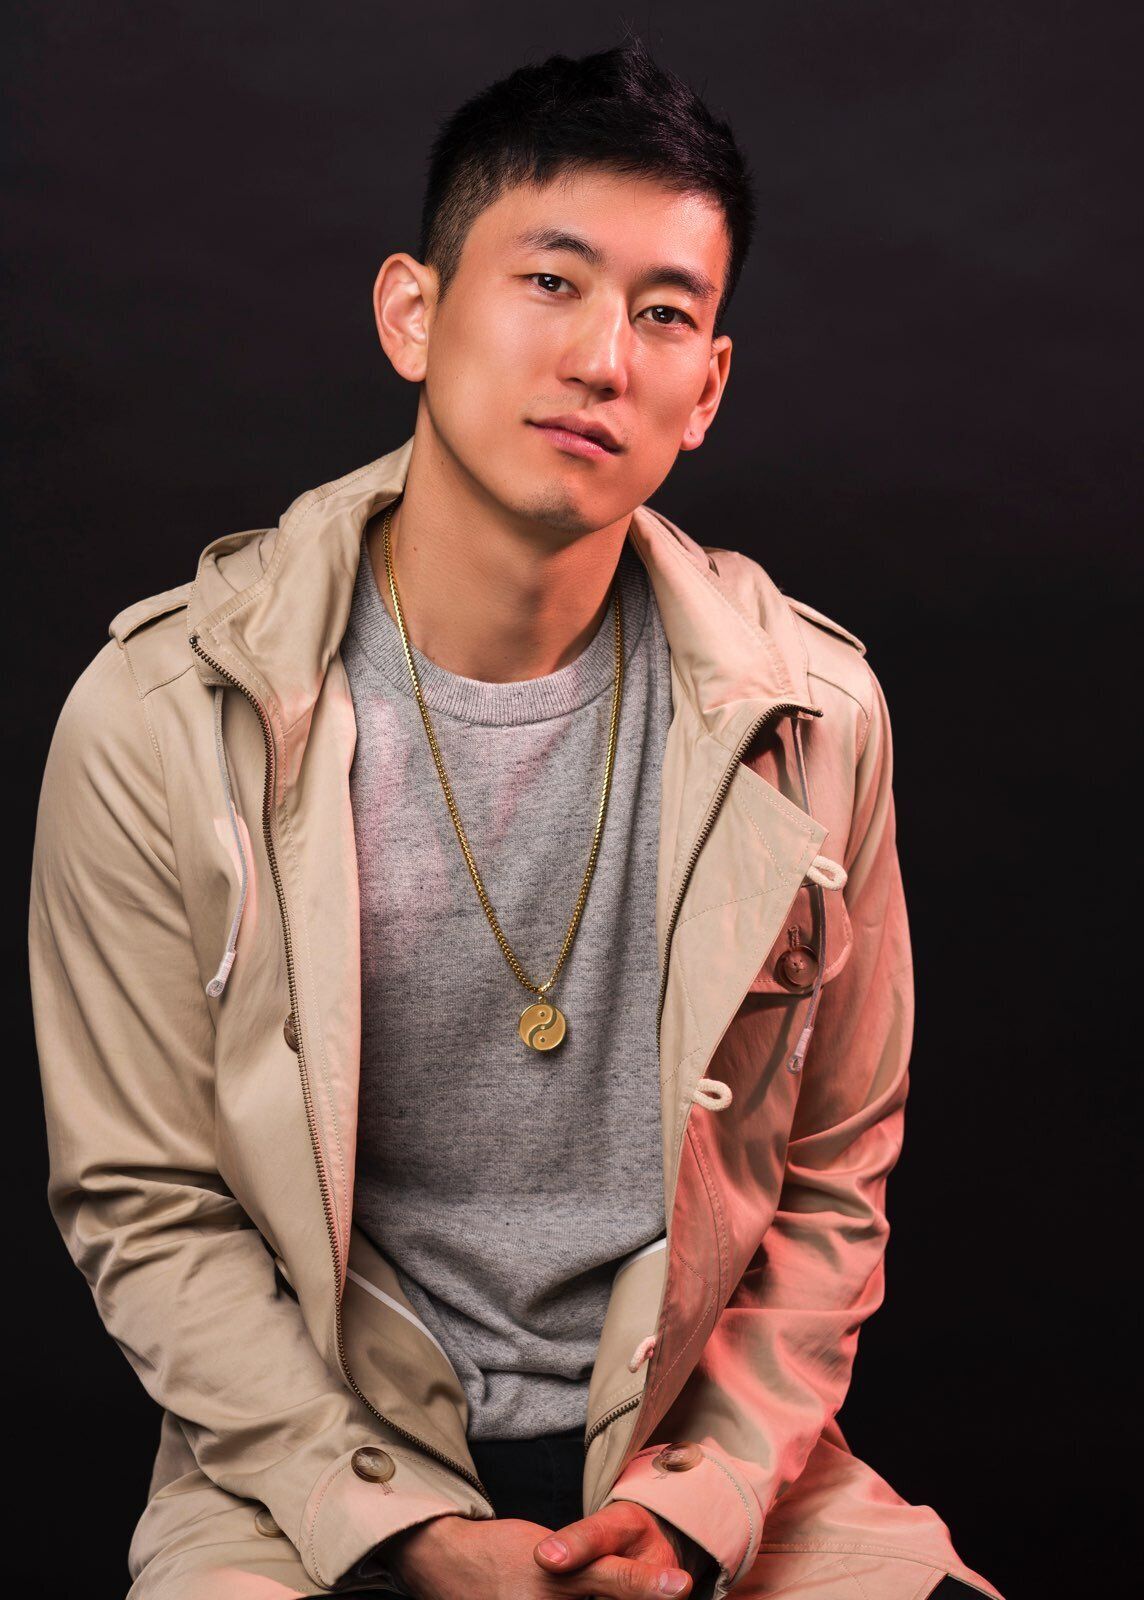 “As Asian Americans, we’re fighting multiple battles here,” says actor Jake Choi.